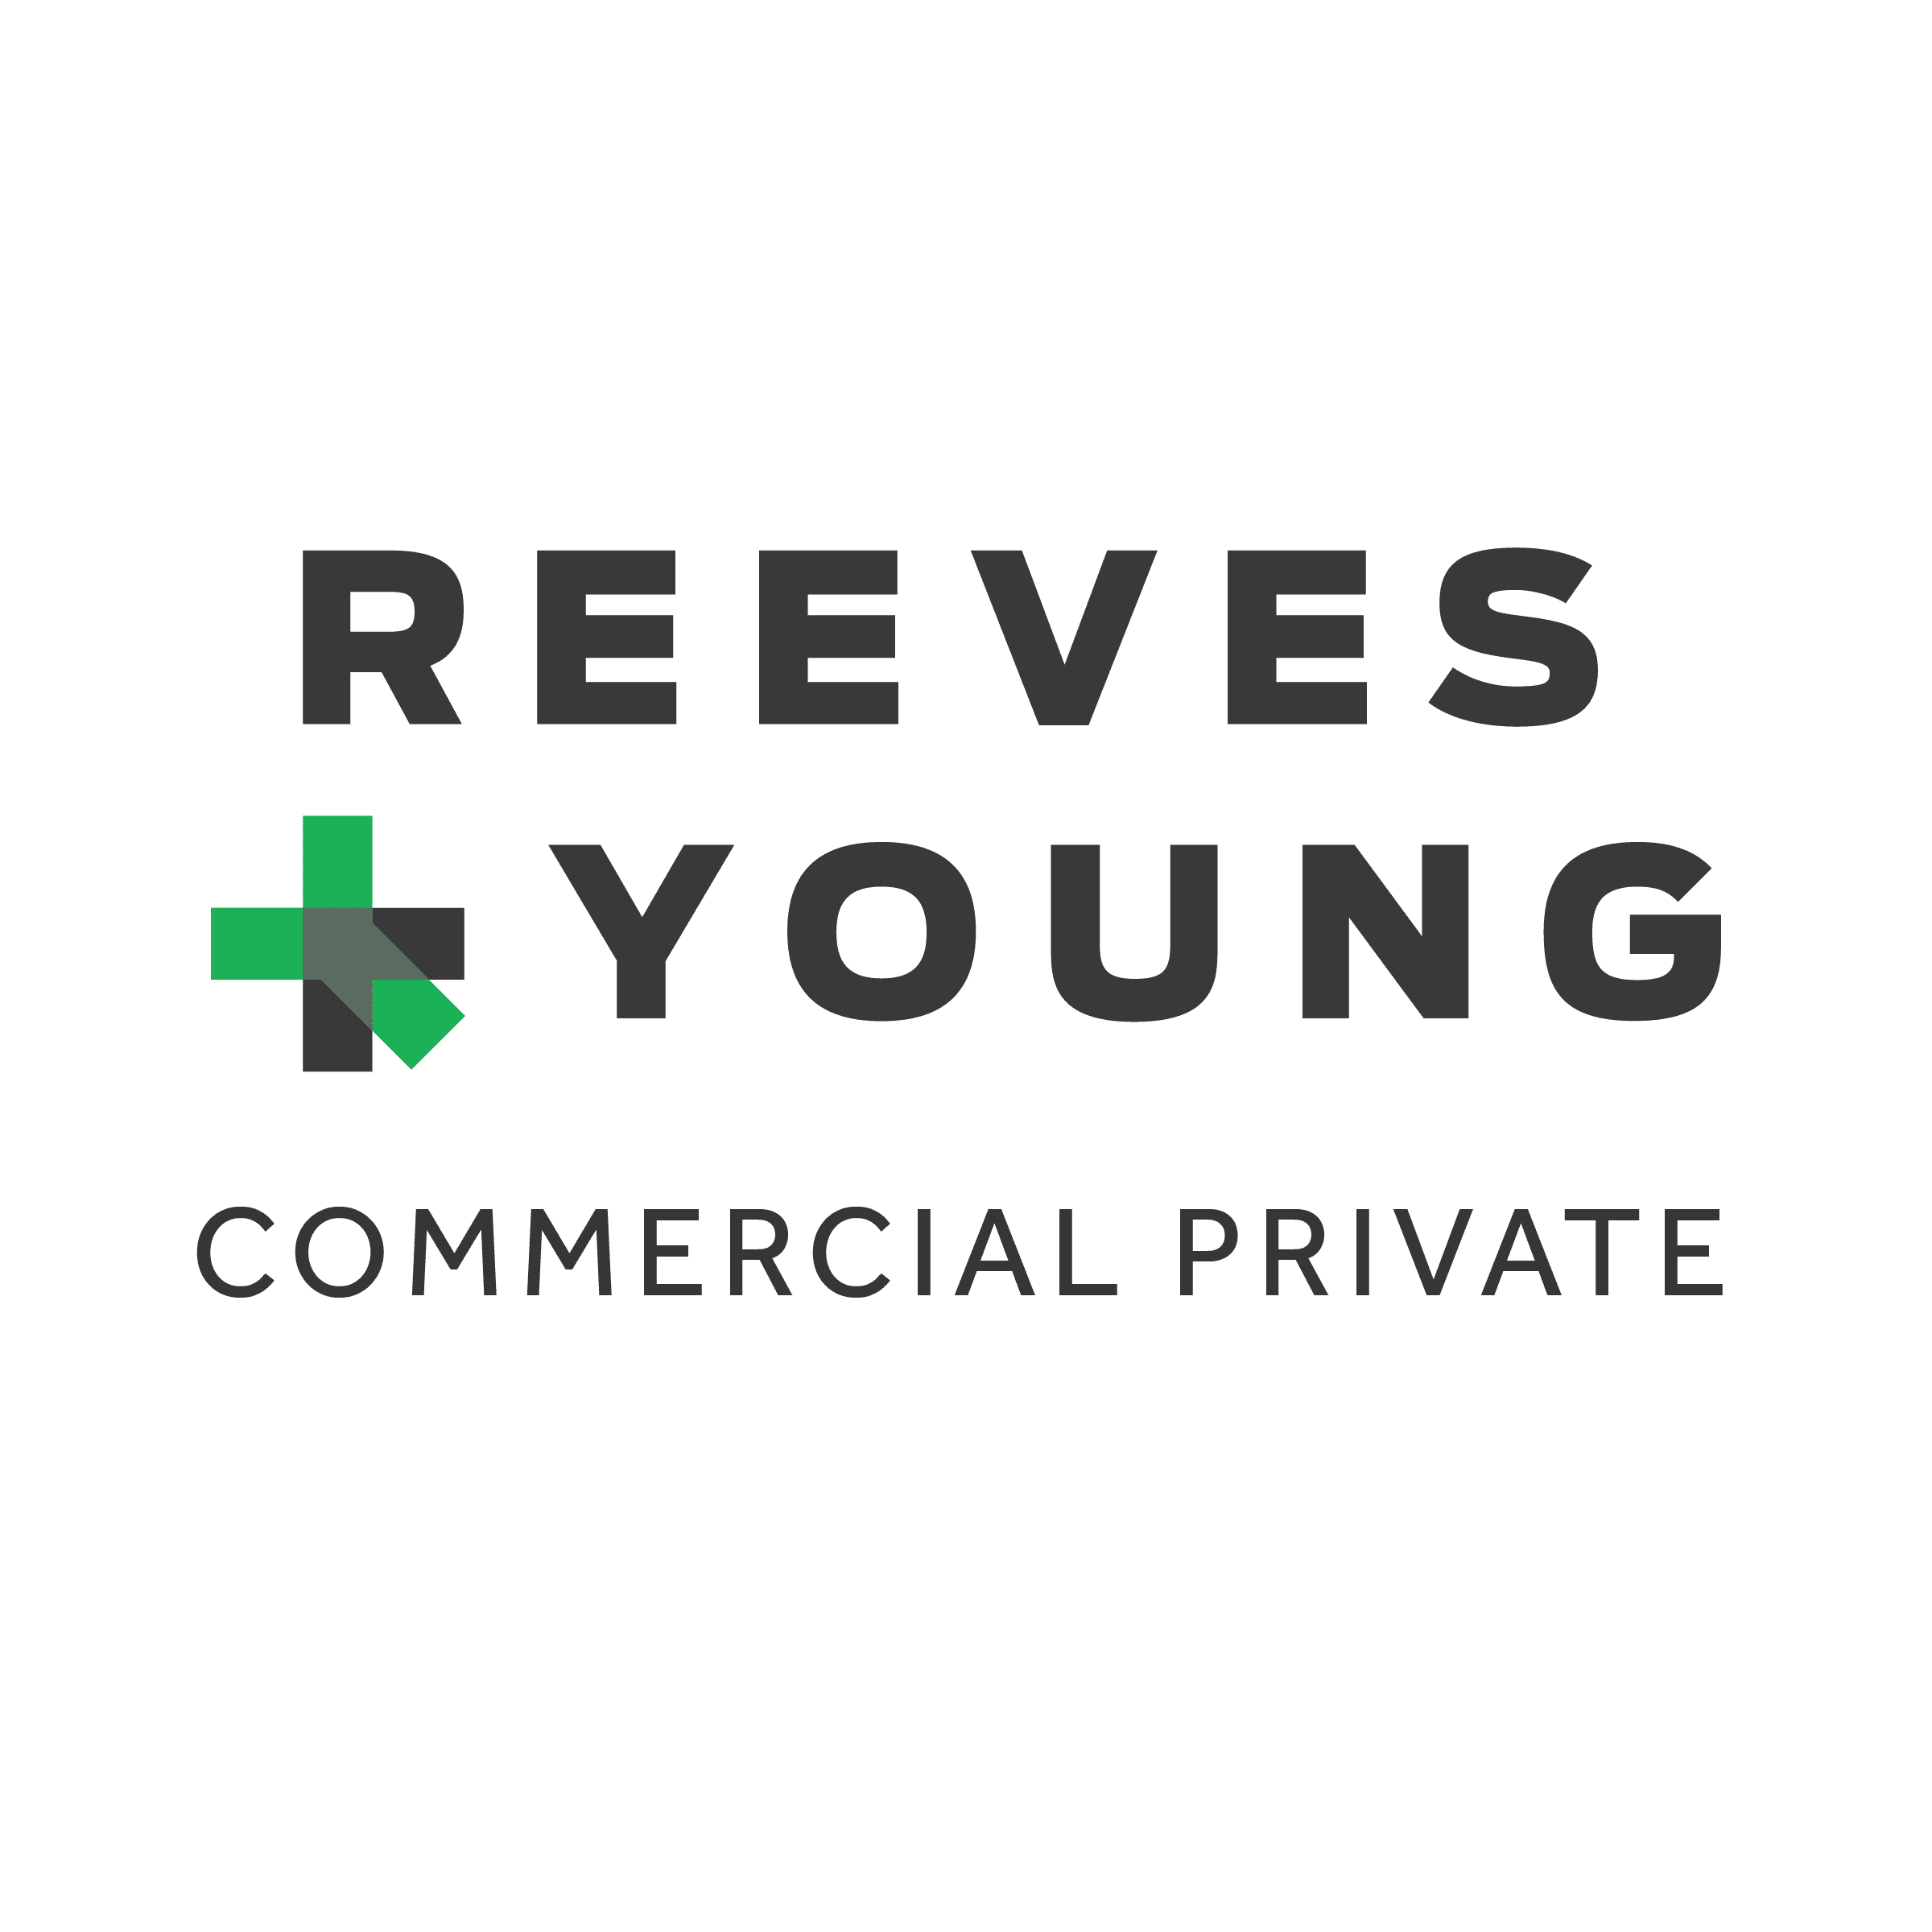 Commercial Private